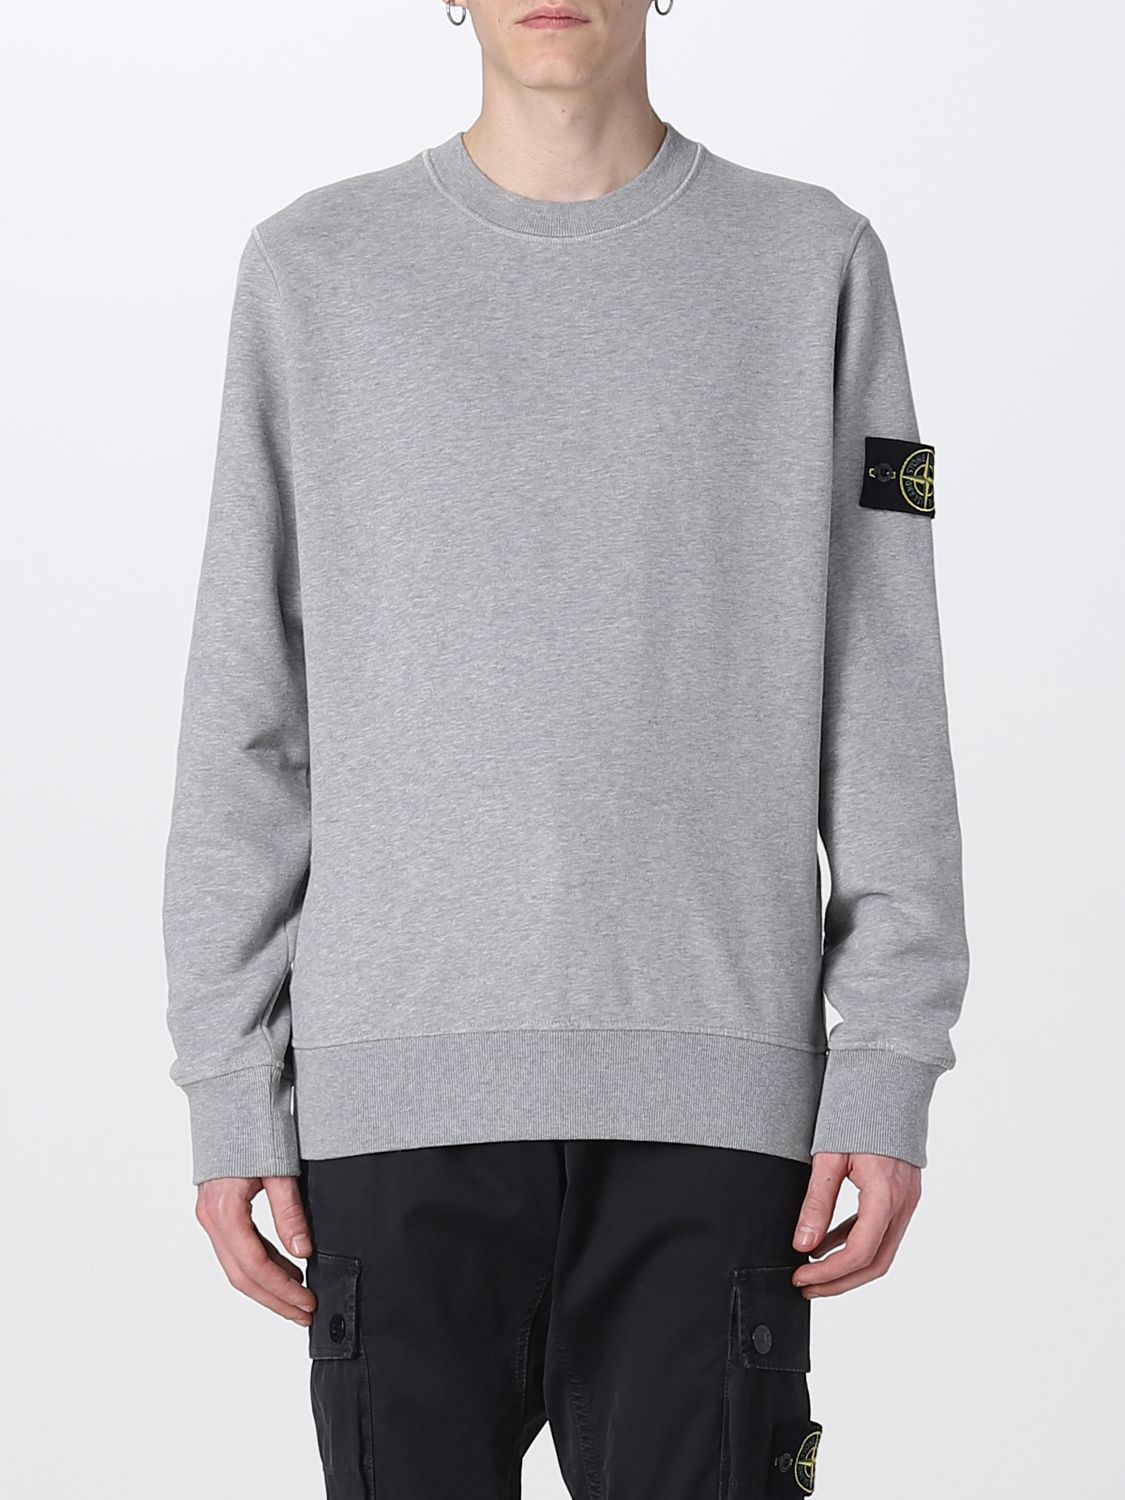 Sweatshirt Stone Island: Stone Island sweatshirt for man grey 1